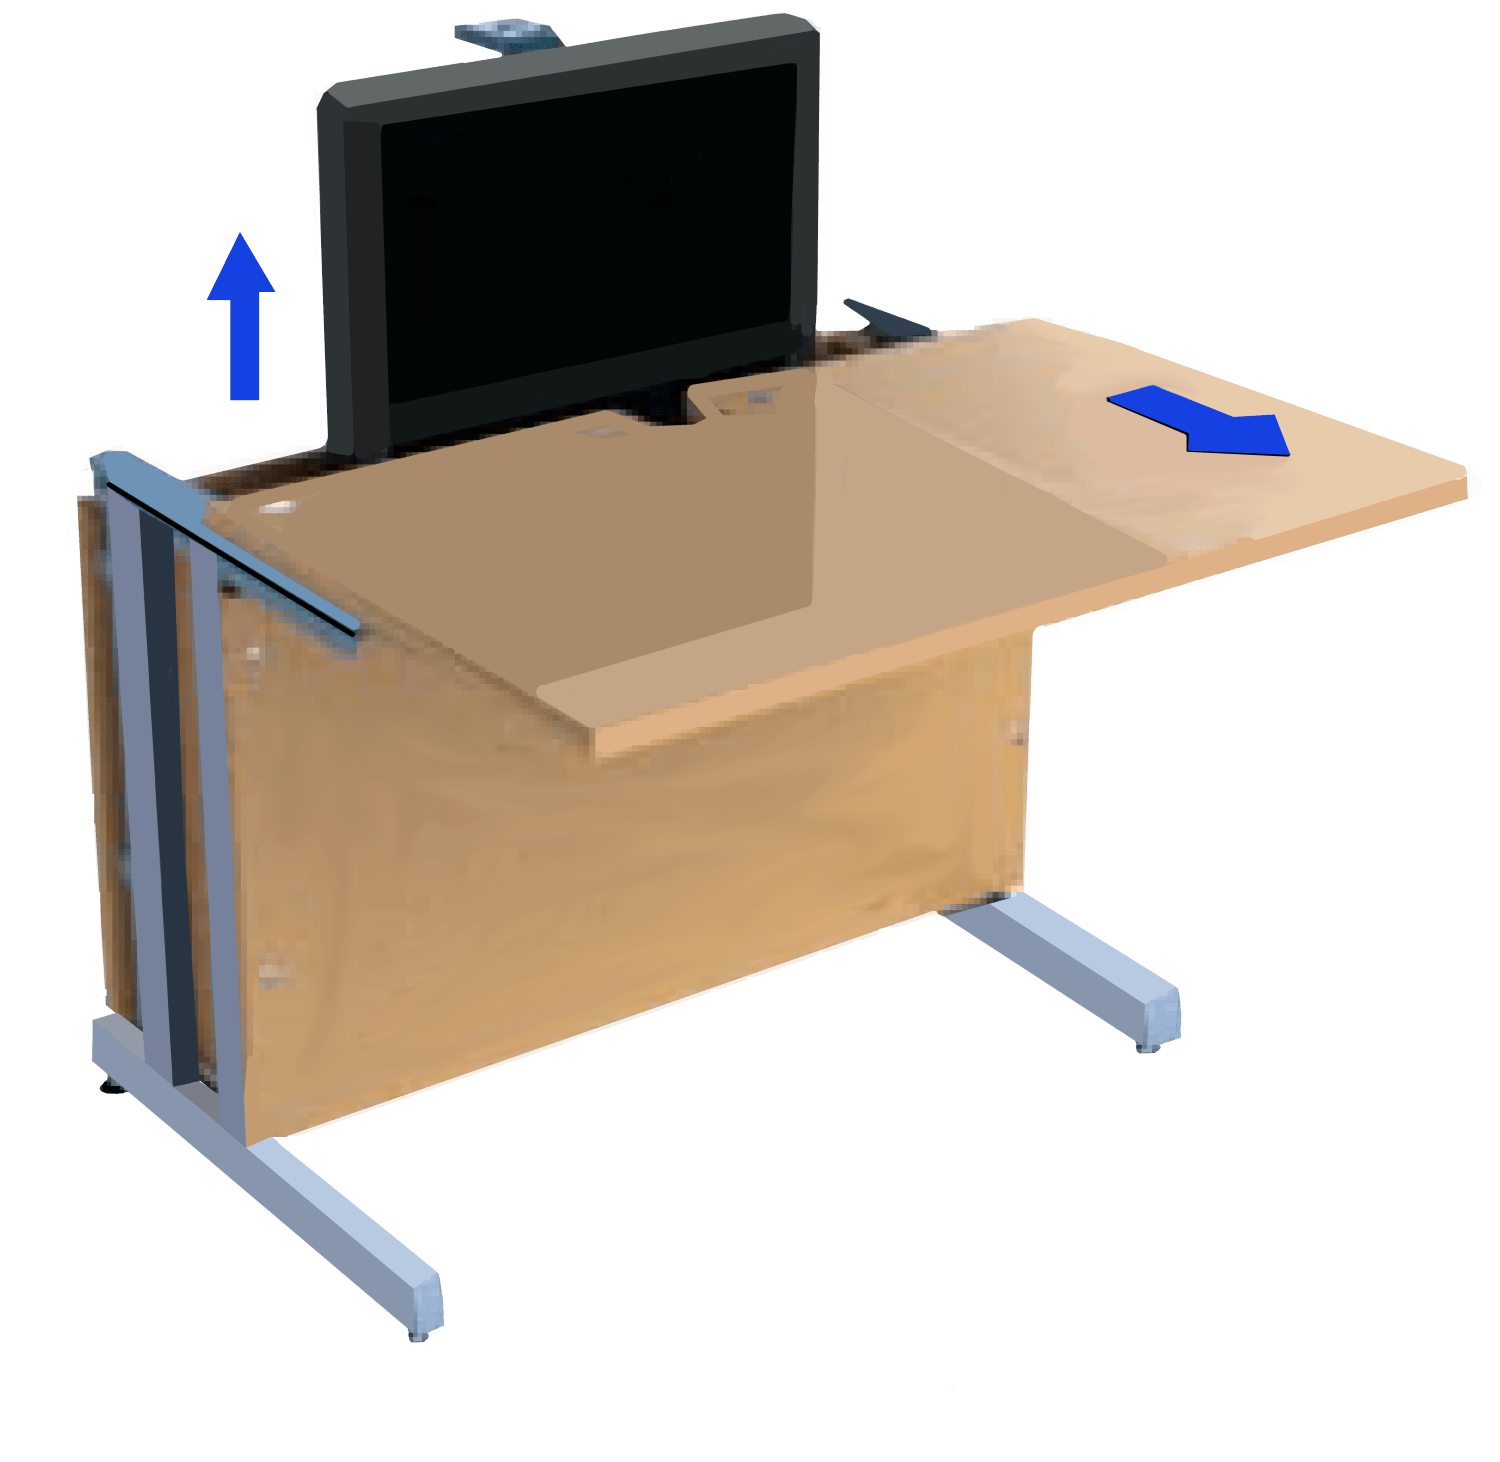 Akhter desk 8 plus in working position image